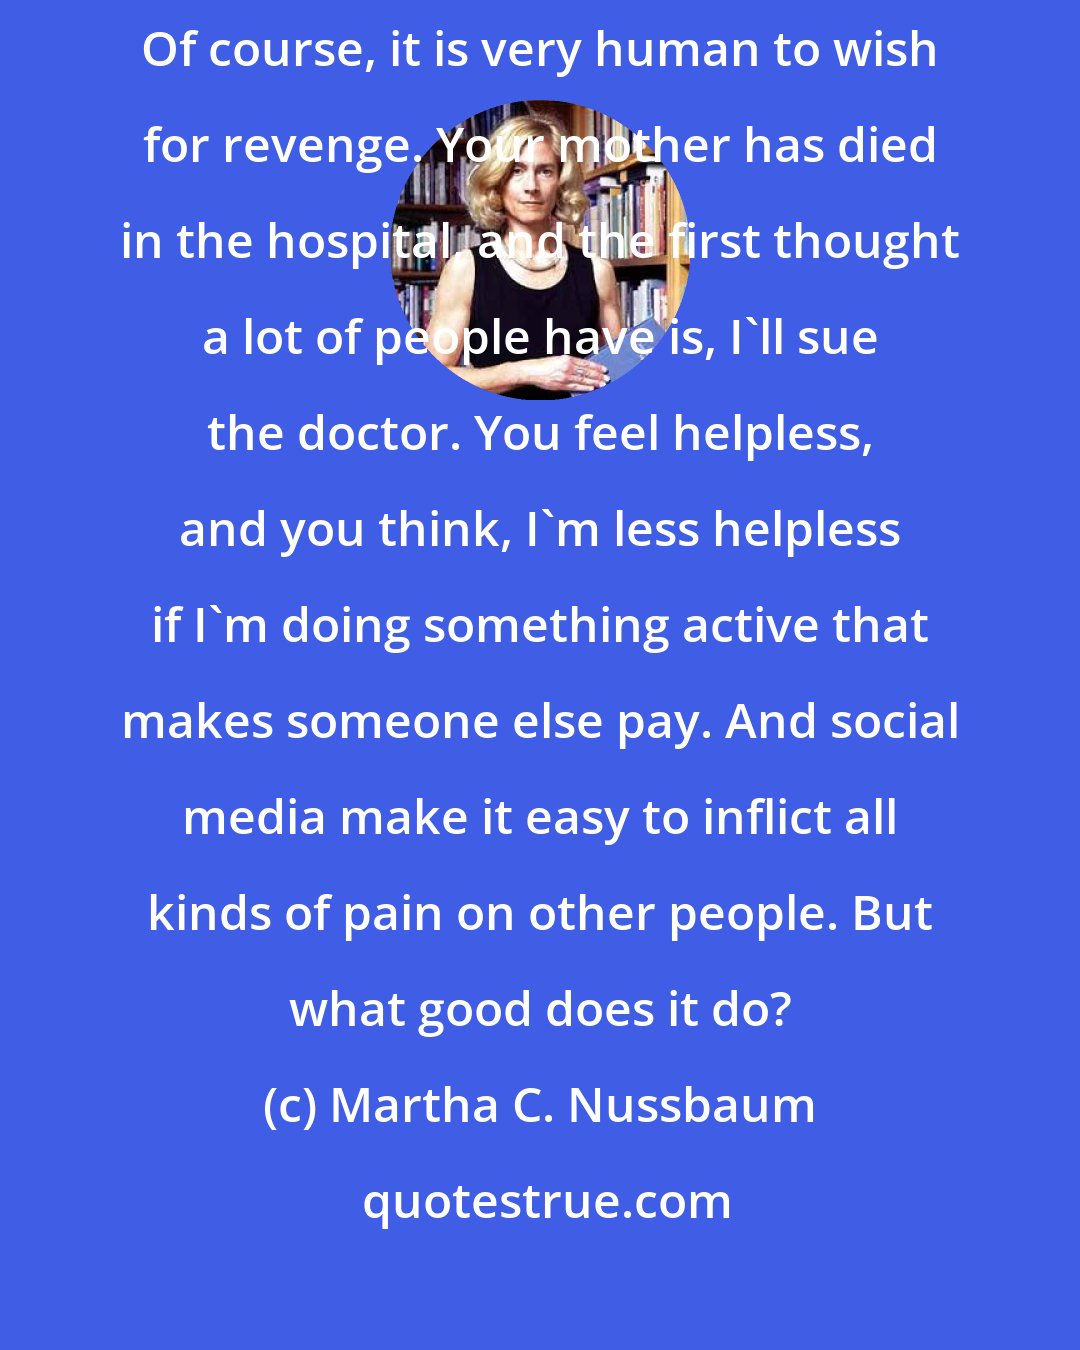 Martha C. Nussbaum: The thing that I find so bad about anger is the desire for payback. Of course, it is very human to wish for revenge. Your mother has died in the hospital, and the first thought a lot of people have is, I'll sue the doctor. You feel helpless, and you think, I'm less helpless if I'm doing something active that makes someone else pay. And social media make it easy to inflict all kinds of pain on other people. But what good does it do?